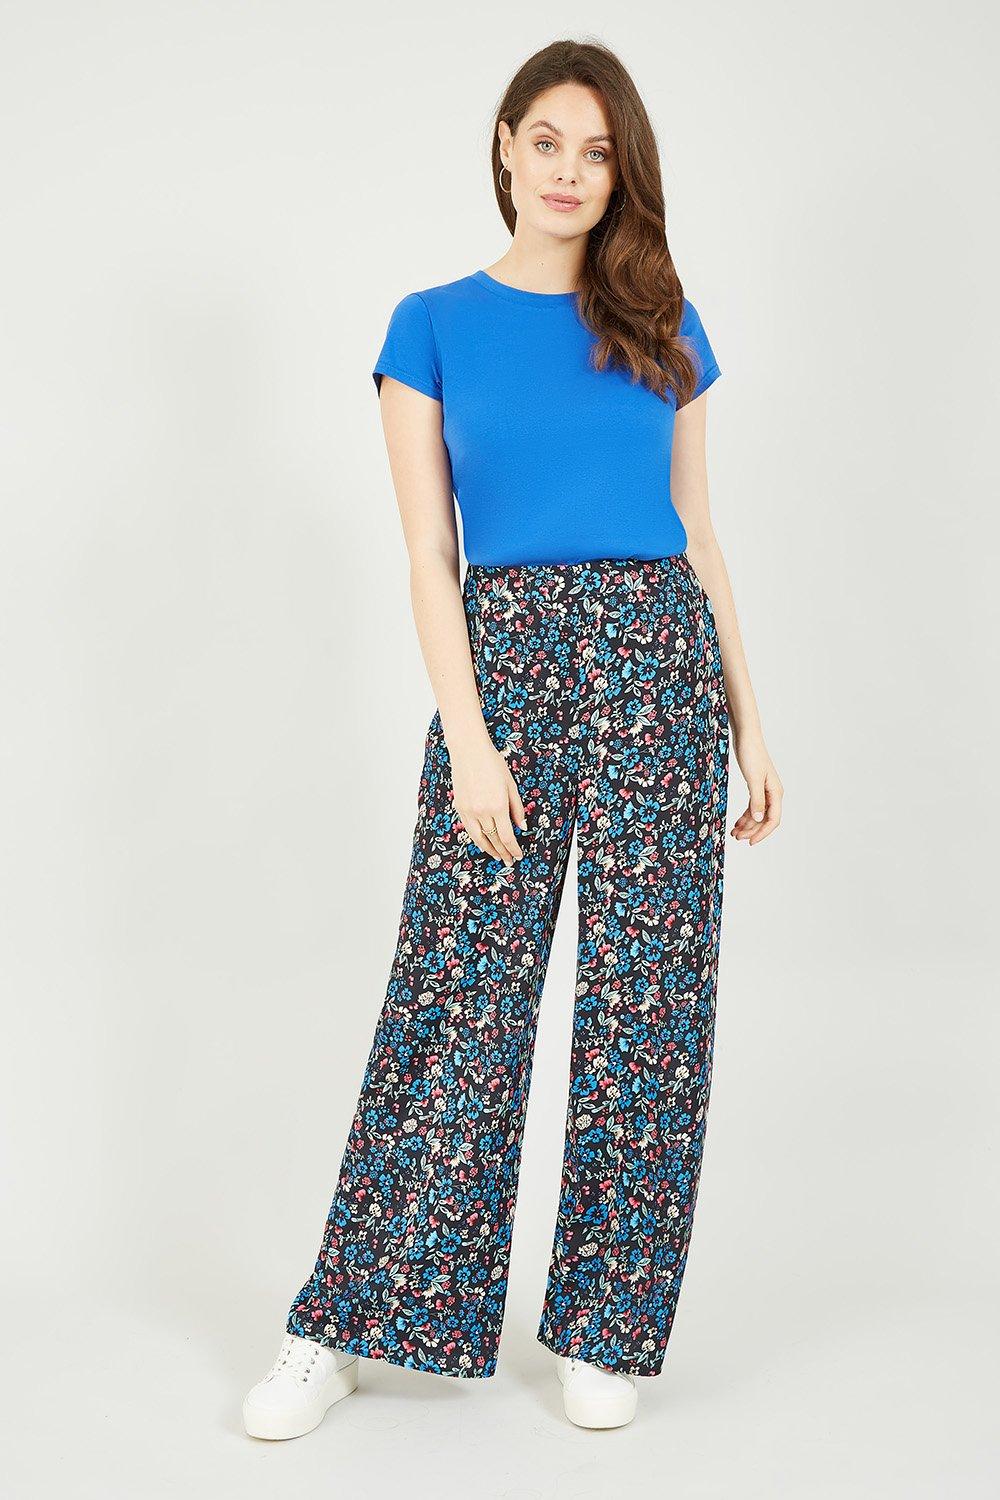 Buy DOROTHY PERKINS Women Petite Black & Green Regular Fit Printed Cropped  Trousers - Trousers for Women 6398526 | Myntra